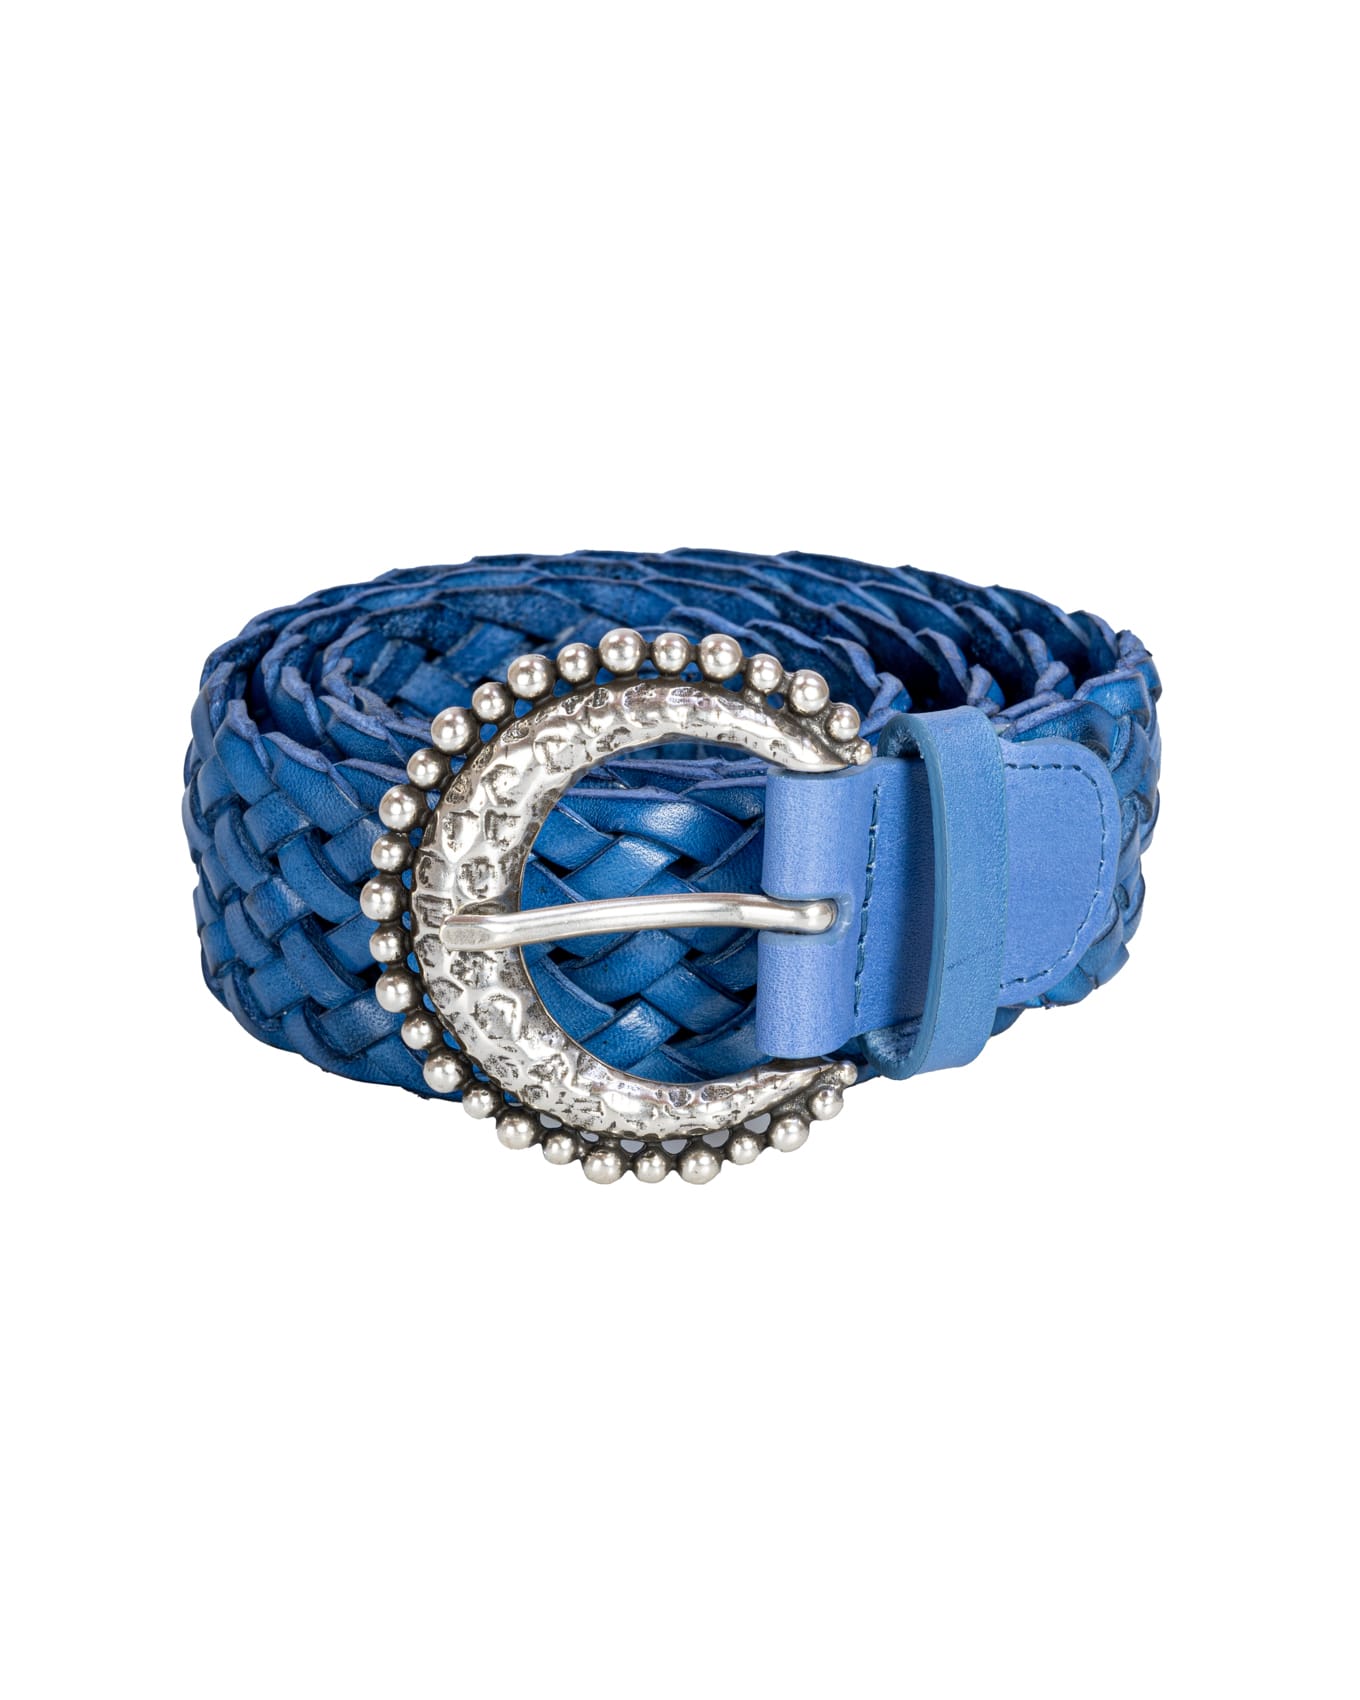 ORCIANI Masculine leather belt with ethnic buckle. , color Blue